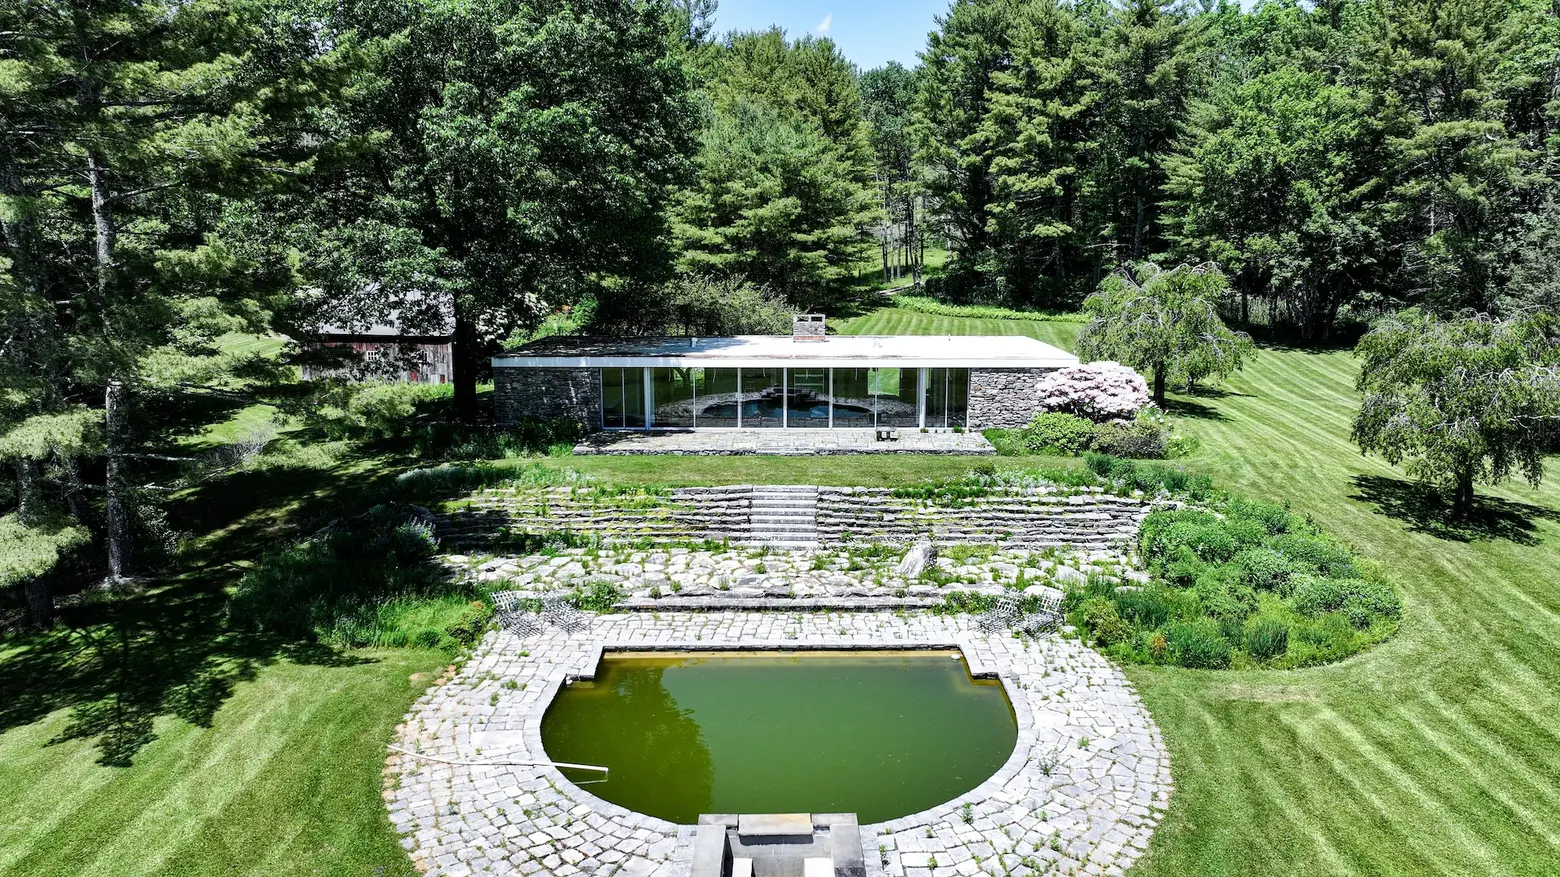 This 1969 stone-and-glass modern house on 25 Connecticut acres is a ‘fire sale’ listing for $1.3M